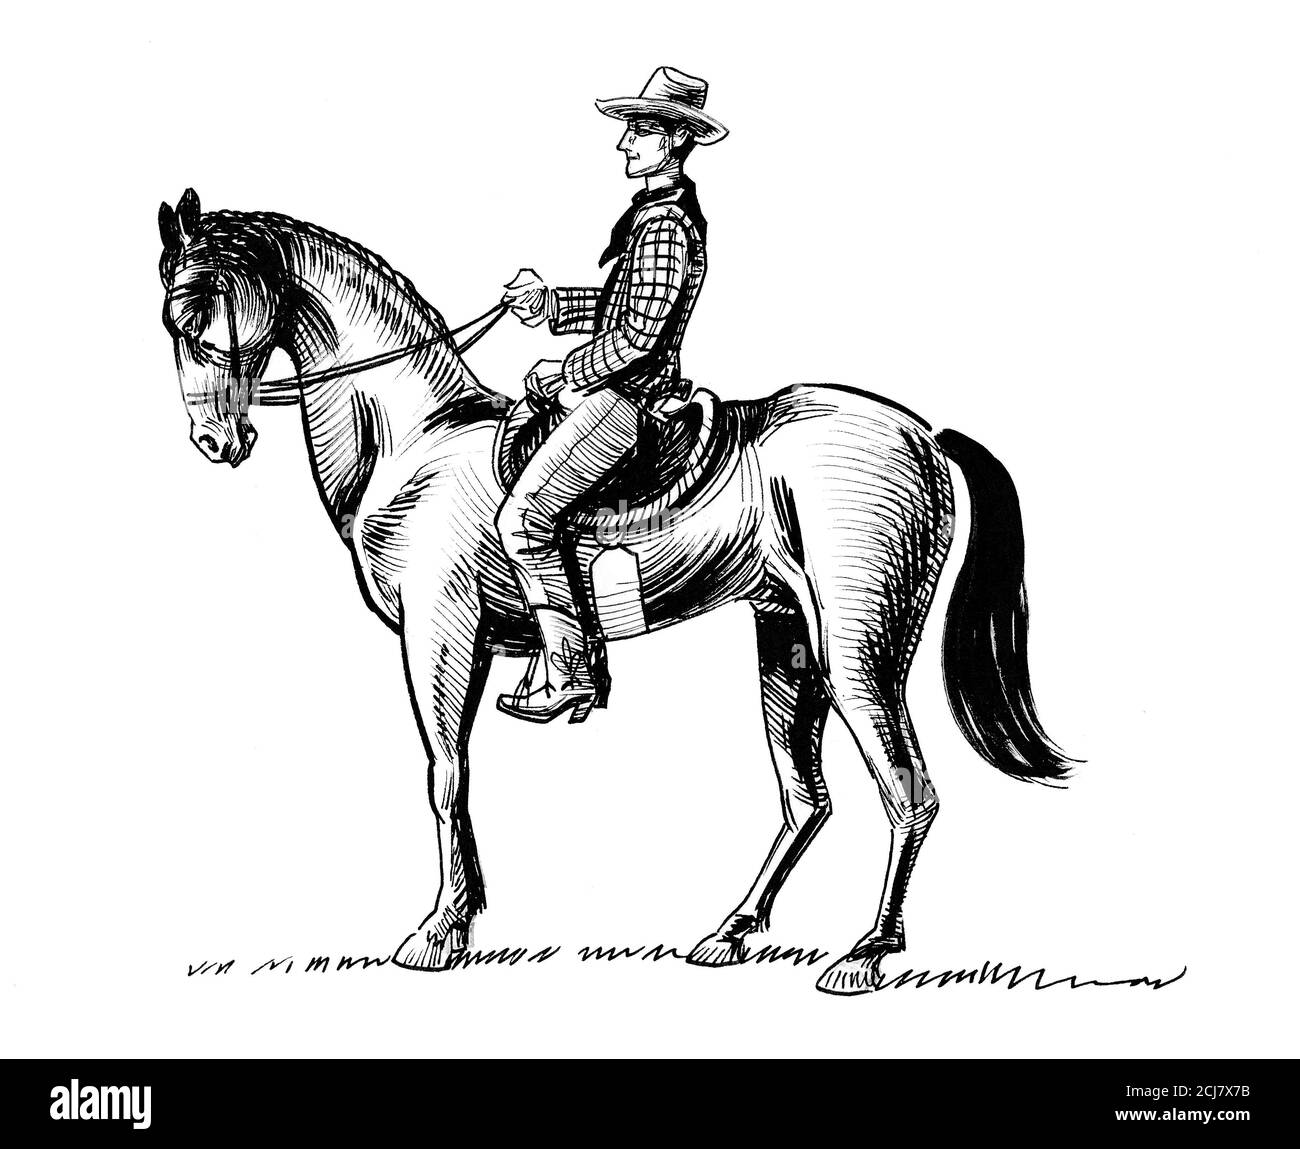 Cowboy riding a horse. ink black and white drawing Stock Photo - Alamy